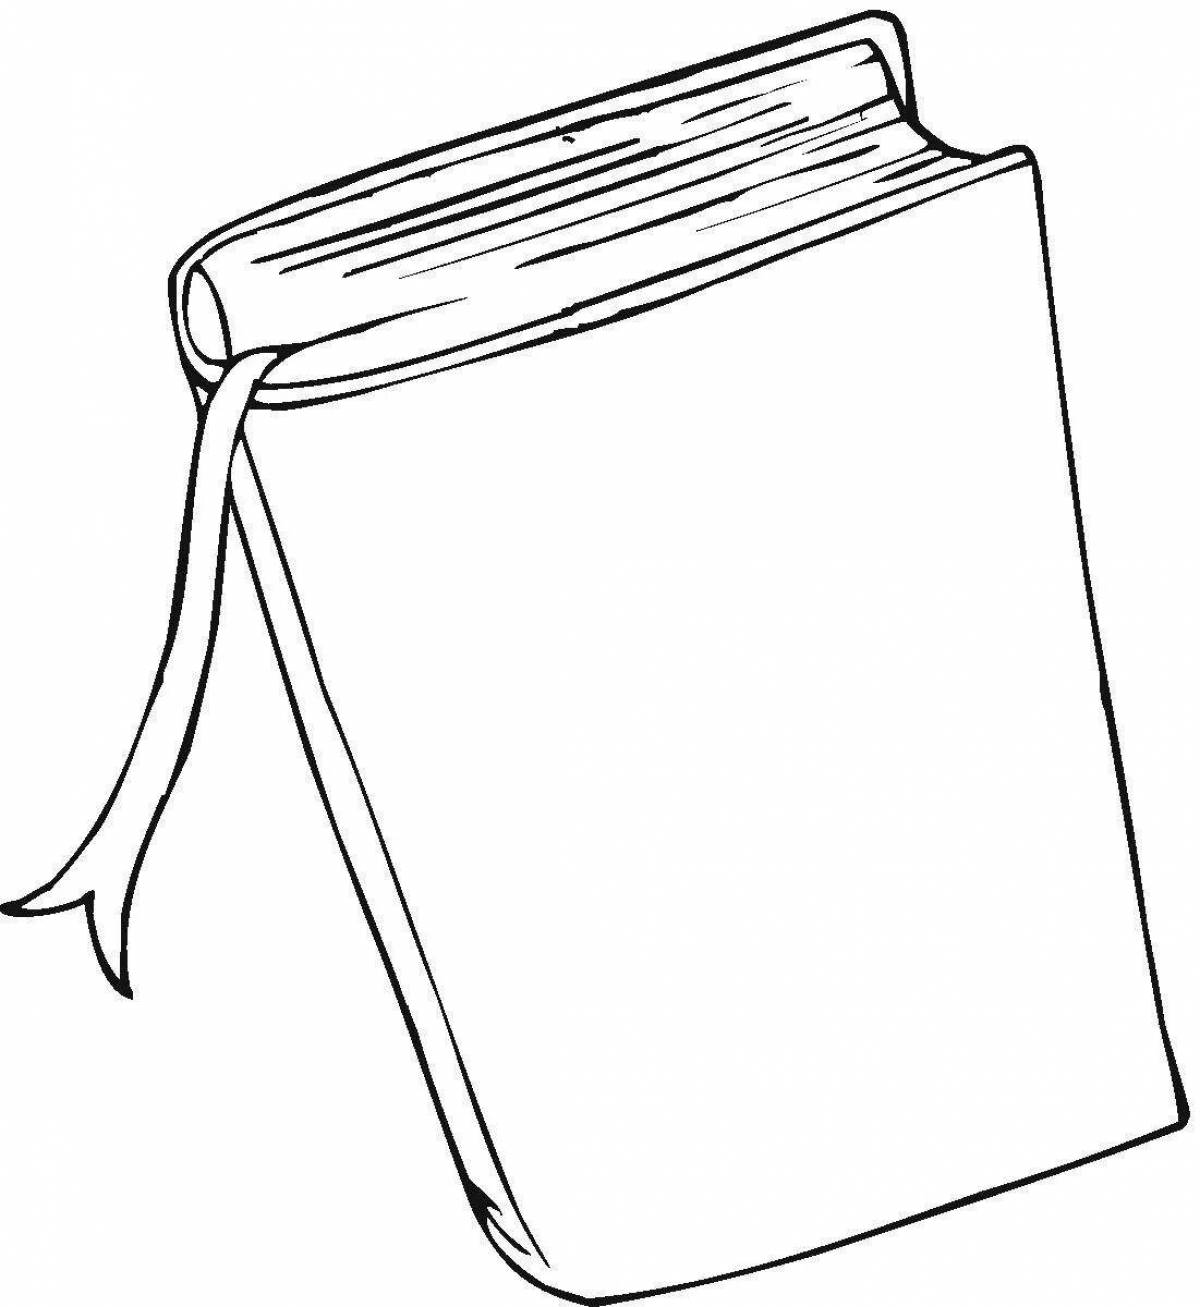 A strikingly toned red book cover coloring page